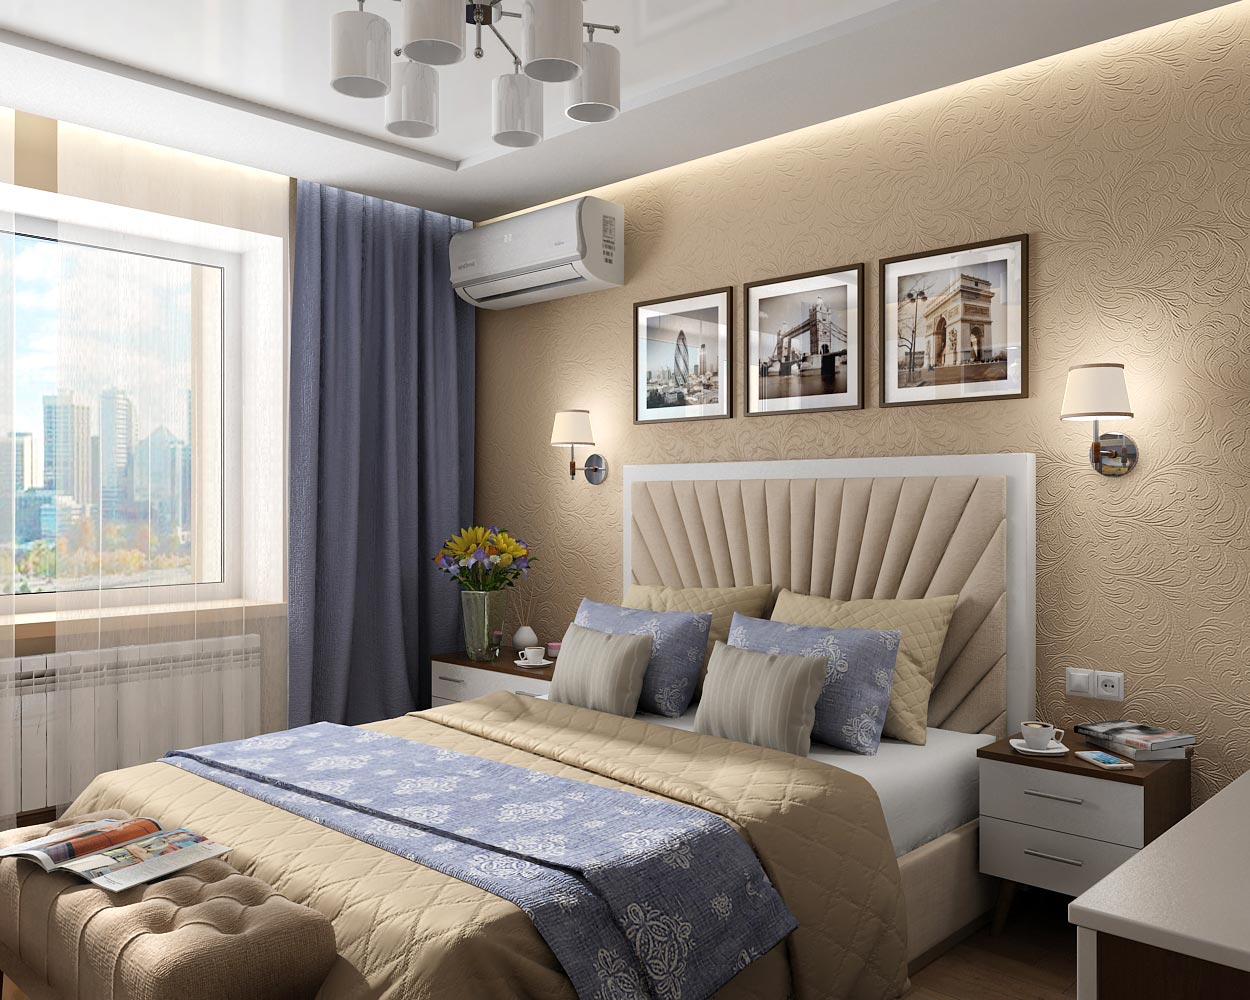 Interior design project for a bedroom in an apartment in Chernigov in 3d max vray 1.5 image